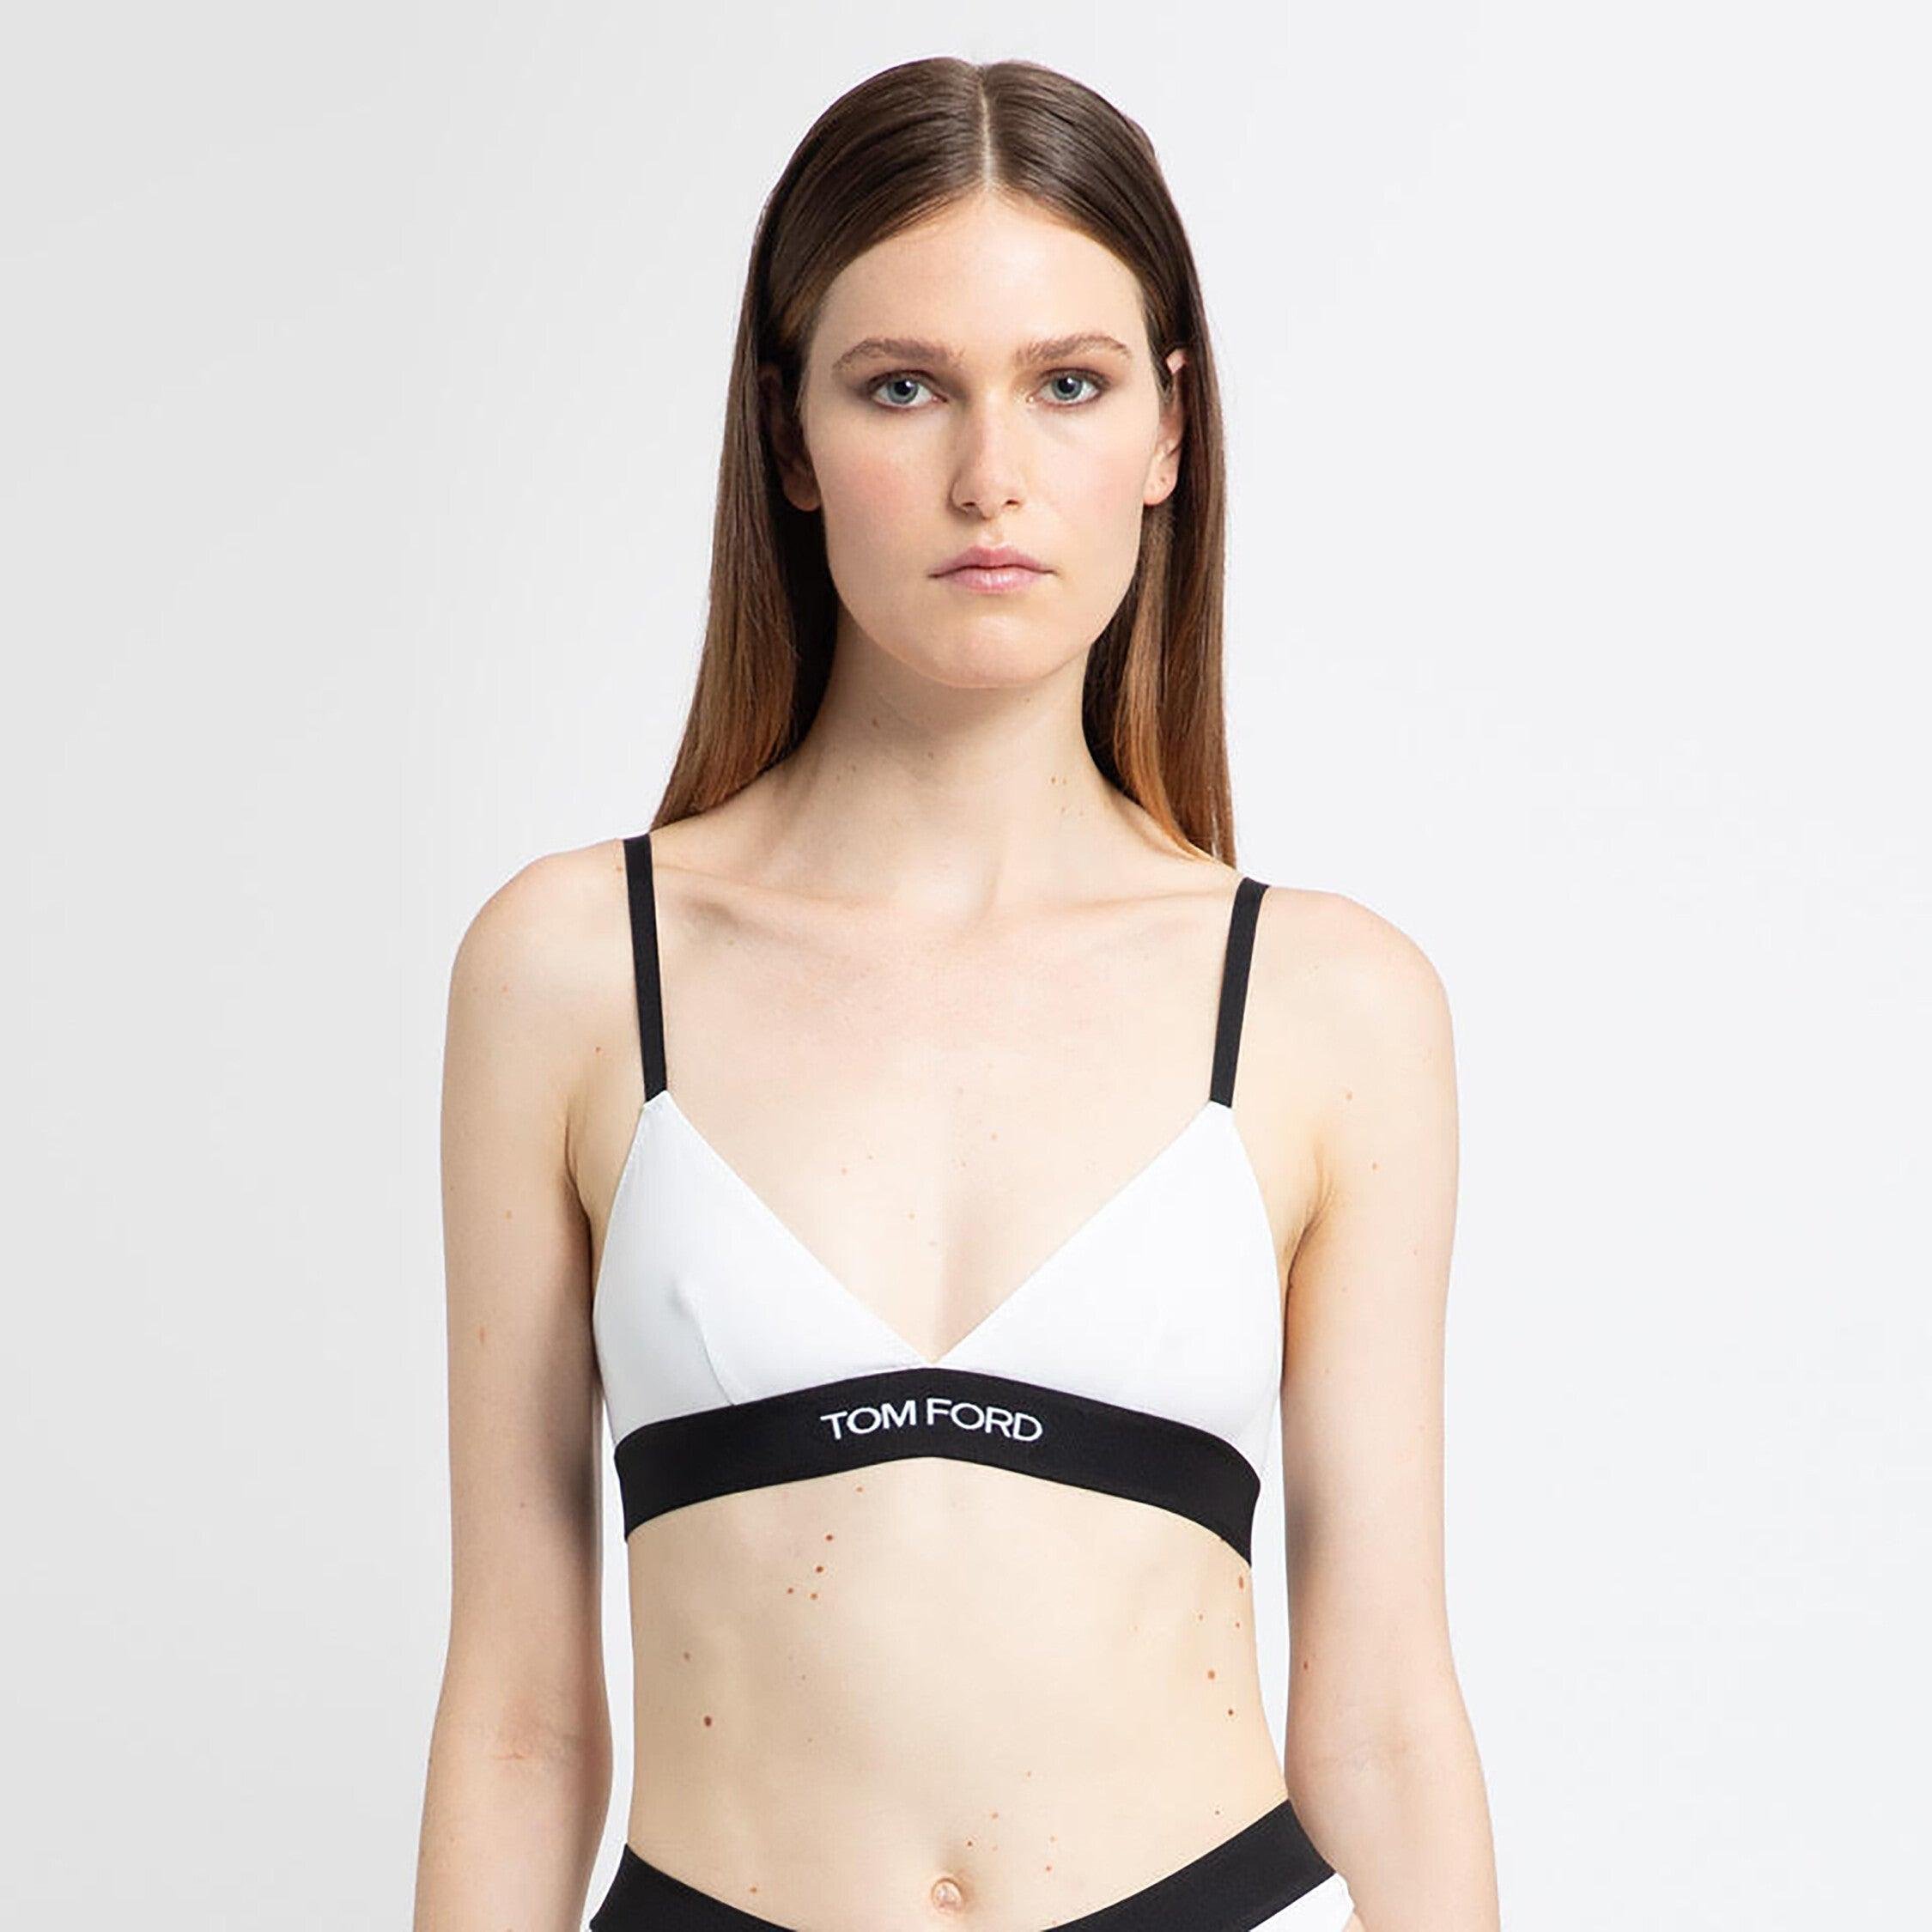 TOM FORD WOMAN BLACK LINGERIE by TOM FORD